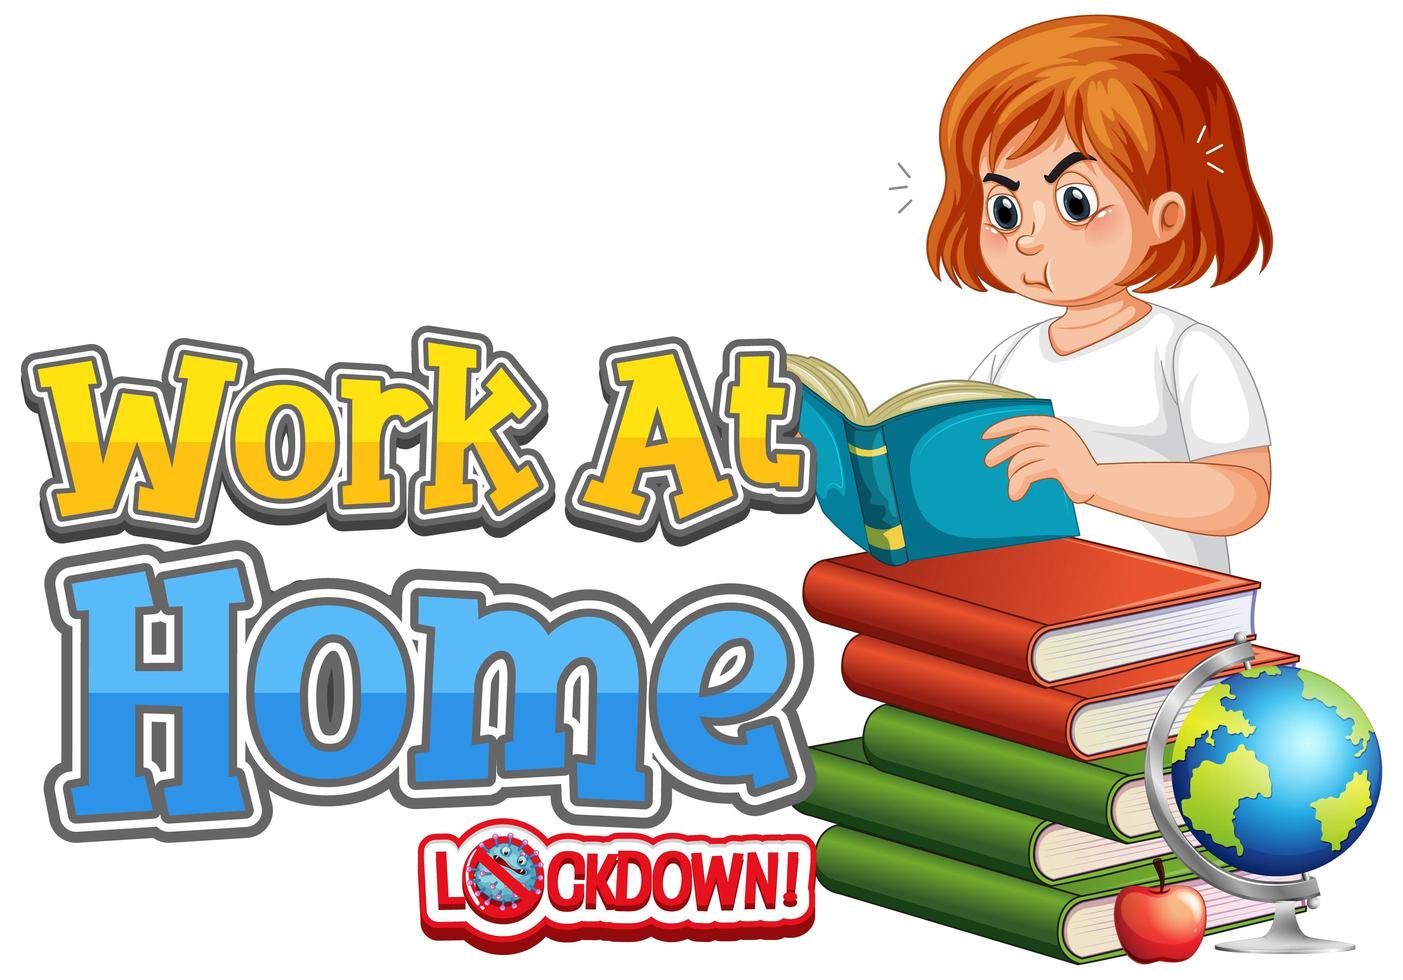 Work from home poster with girl reading books vector